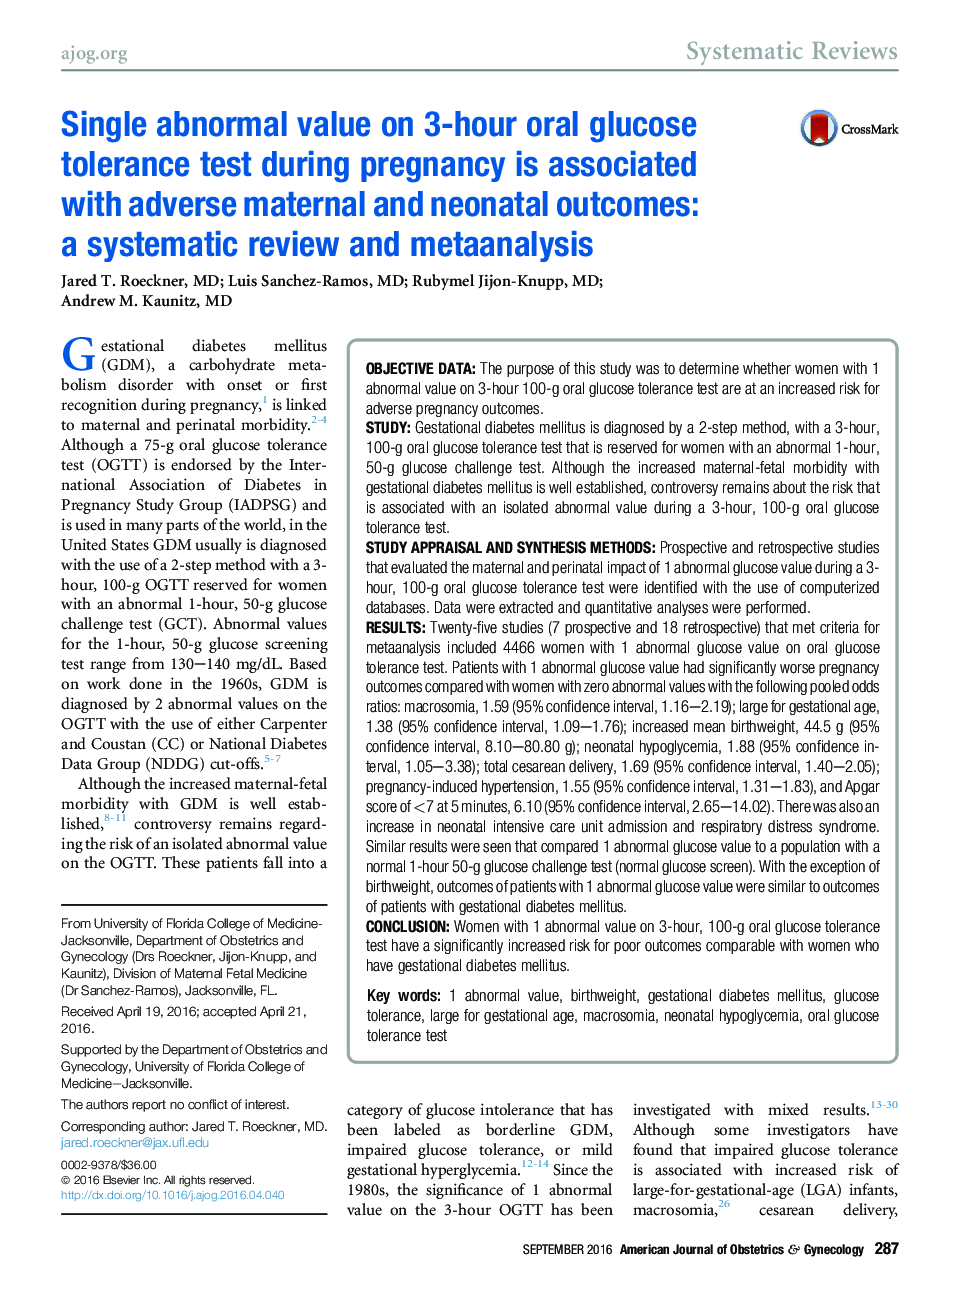 Single abnormal value on 3-hour oral glucose tolerance test during pregnancy is associated with adverse maternal and neonatal outcomes: a systematic review and metaanalysis 